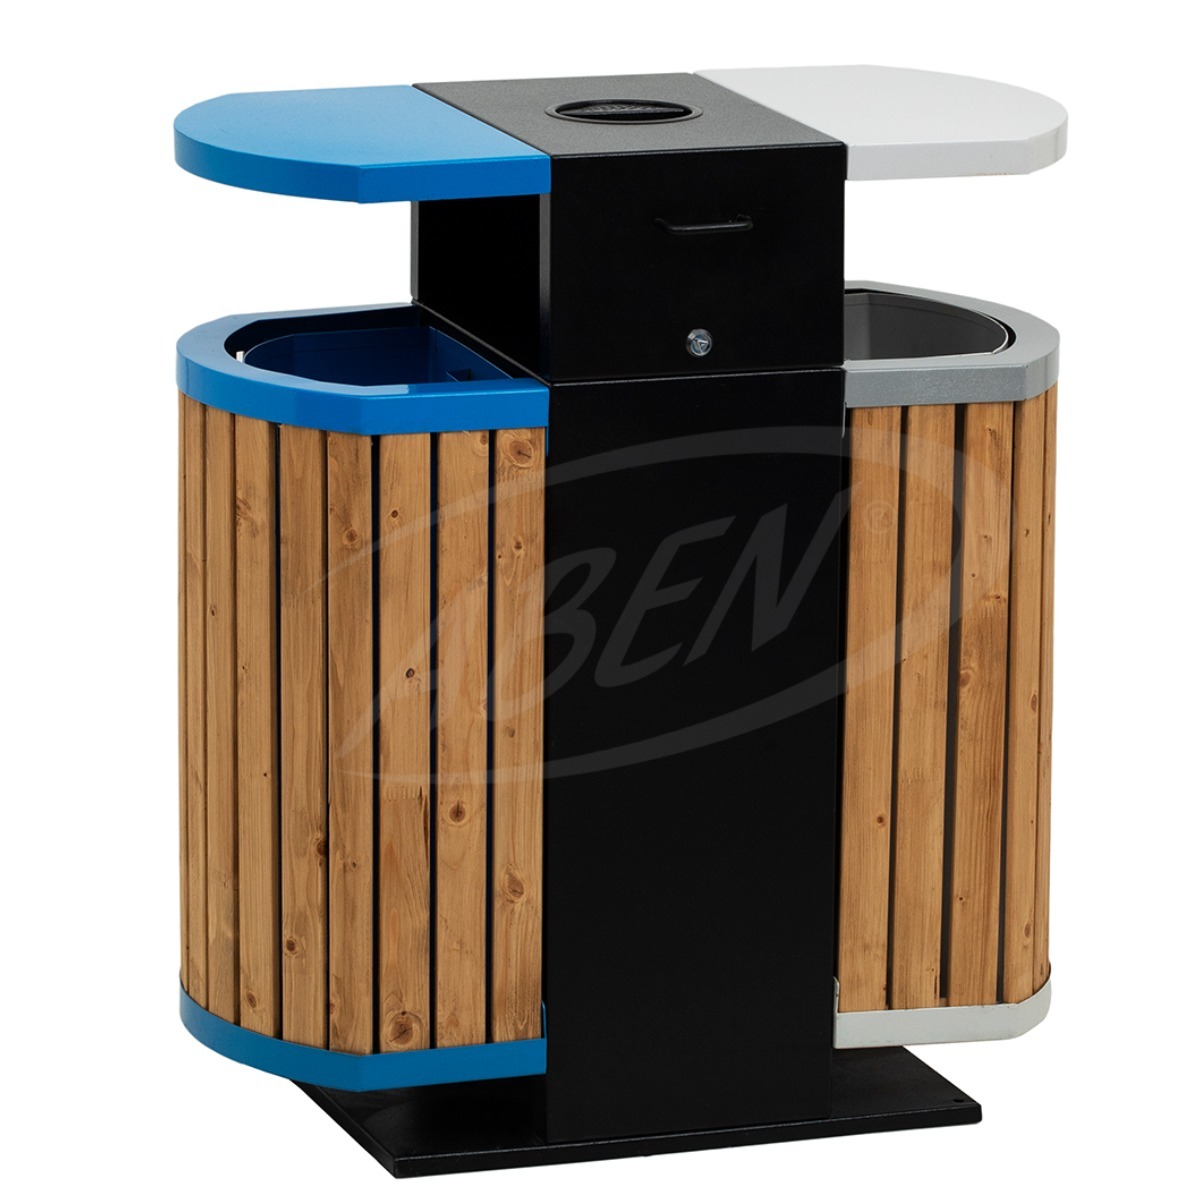 AB-521 Wood Open Space Trash Can